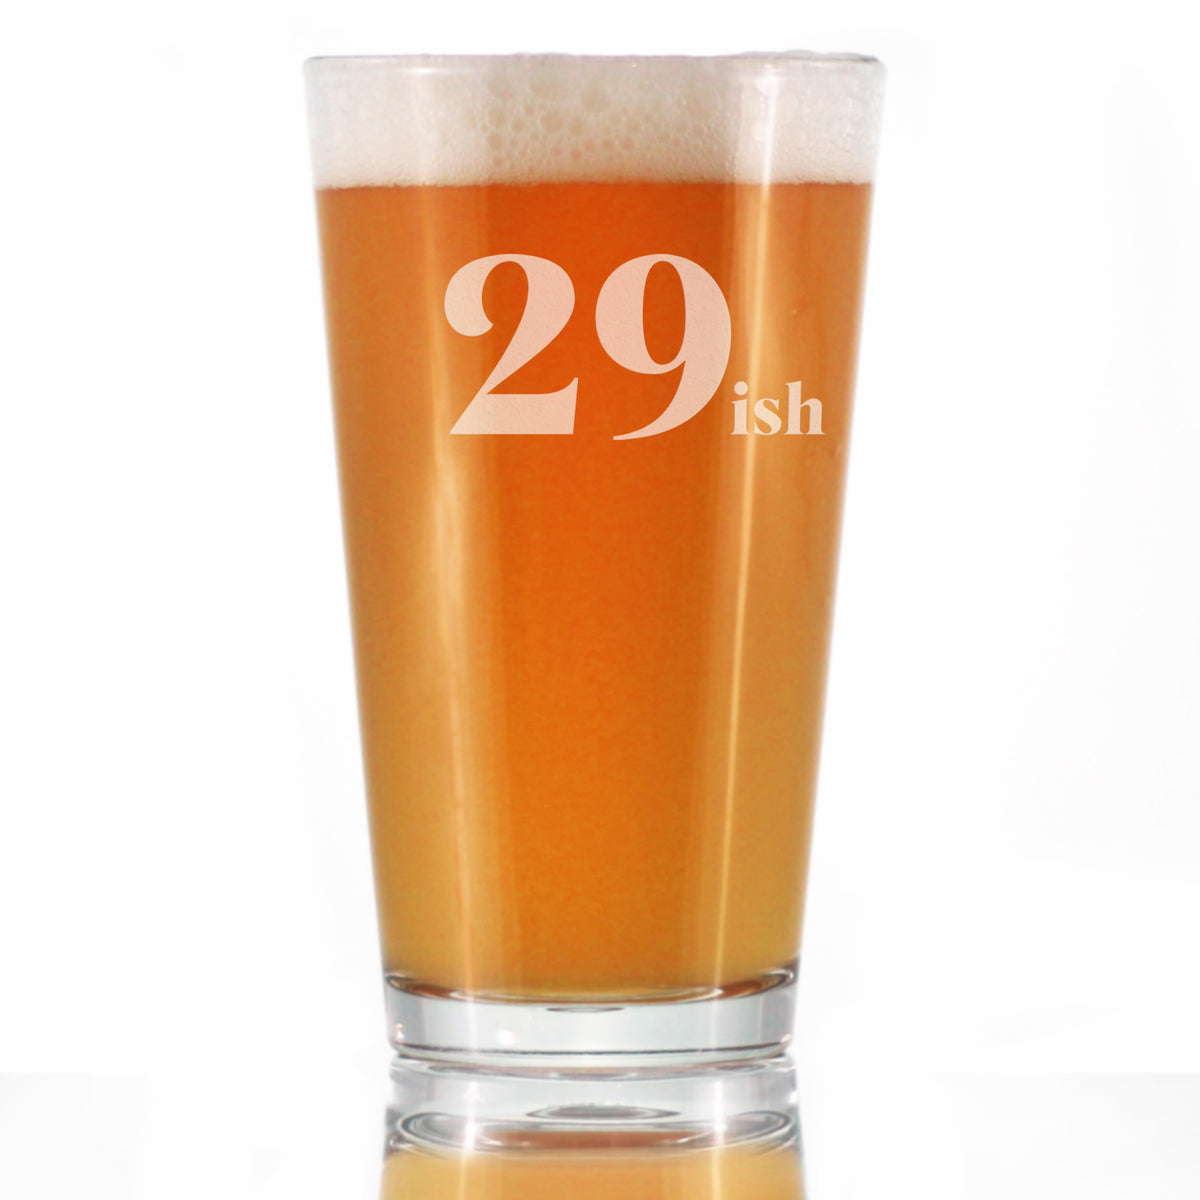 29ish - Funny 16 oz Pint Glass for Beer - 30th Birthday Gifts for Men or Women Turning 30 - Fun Bday Decor